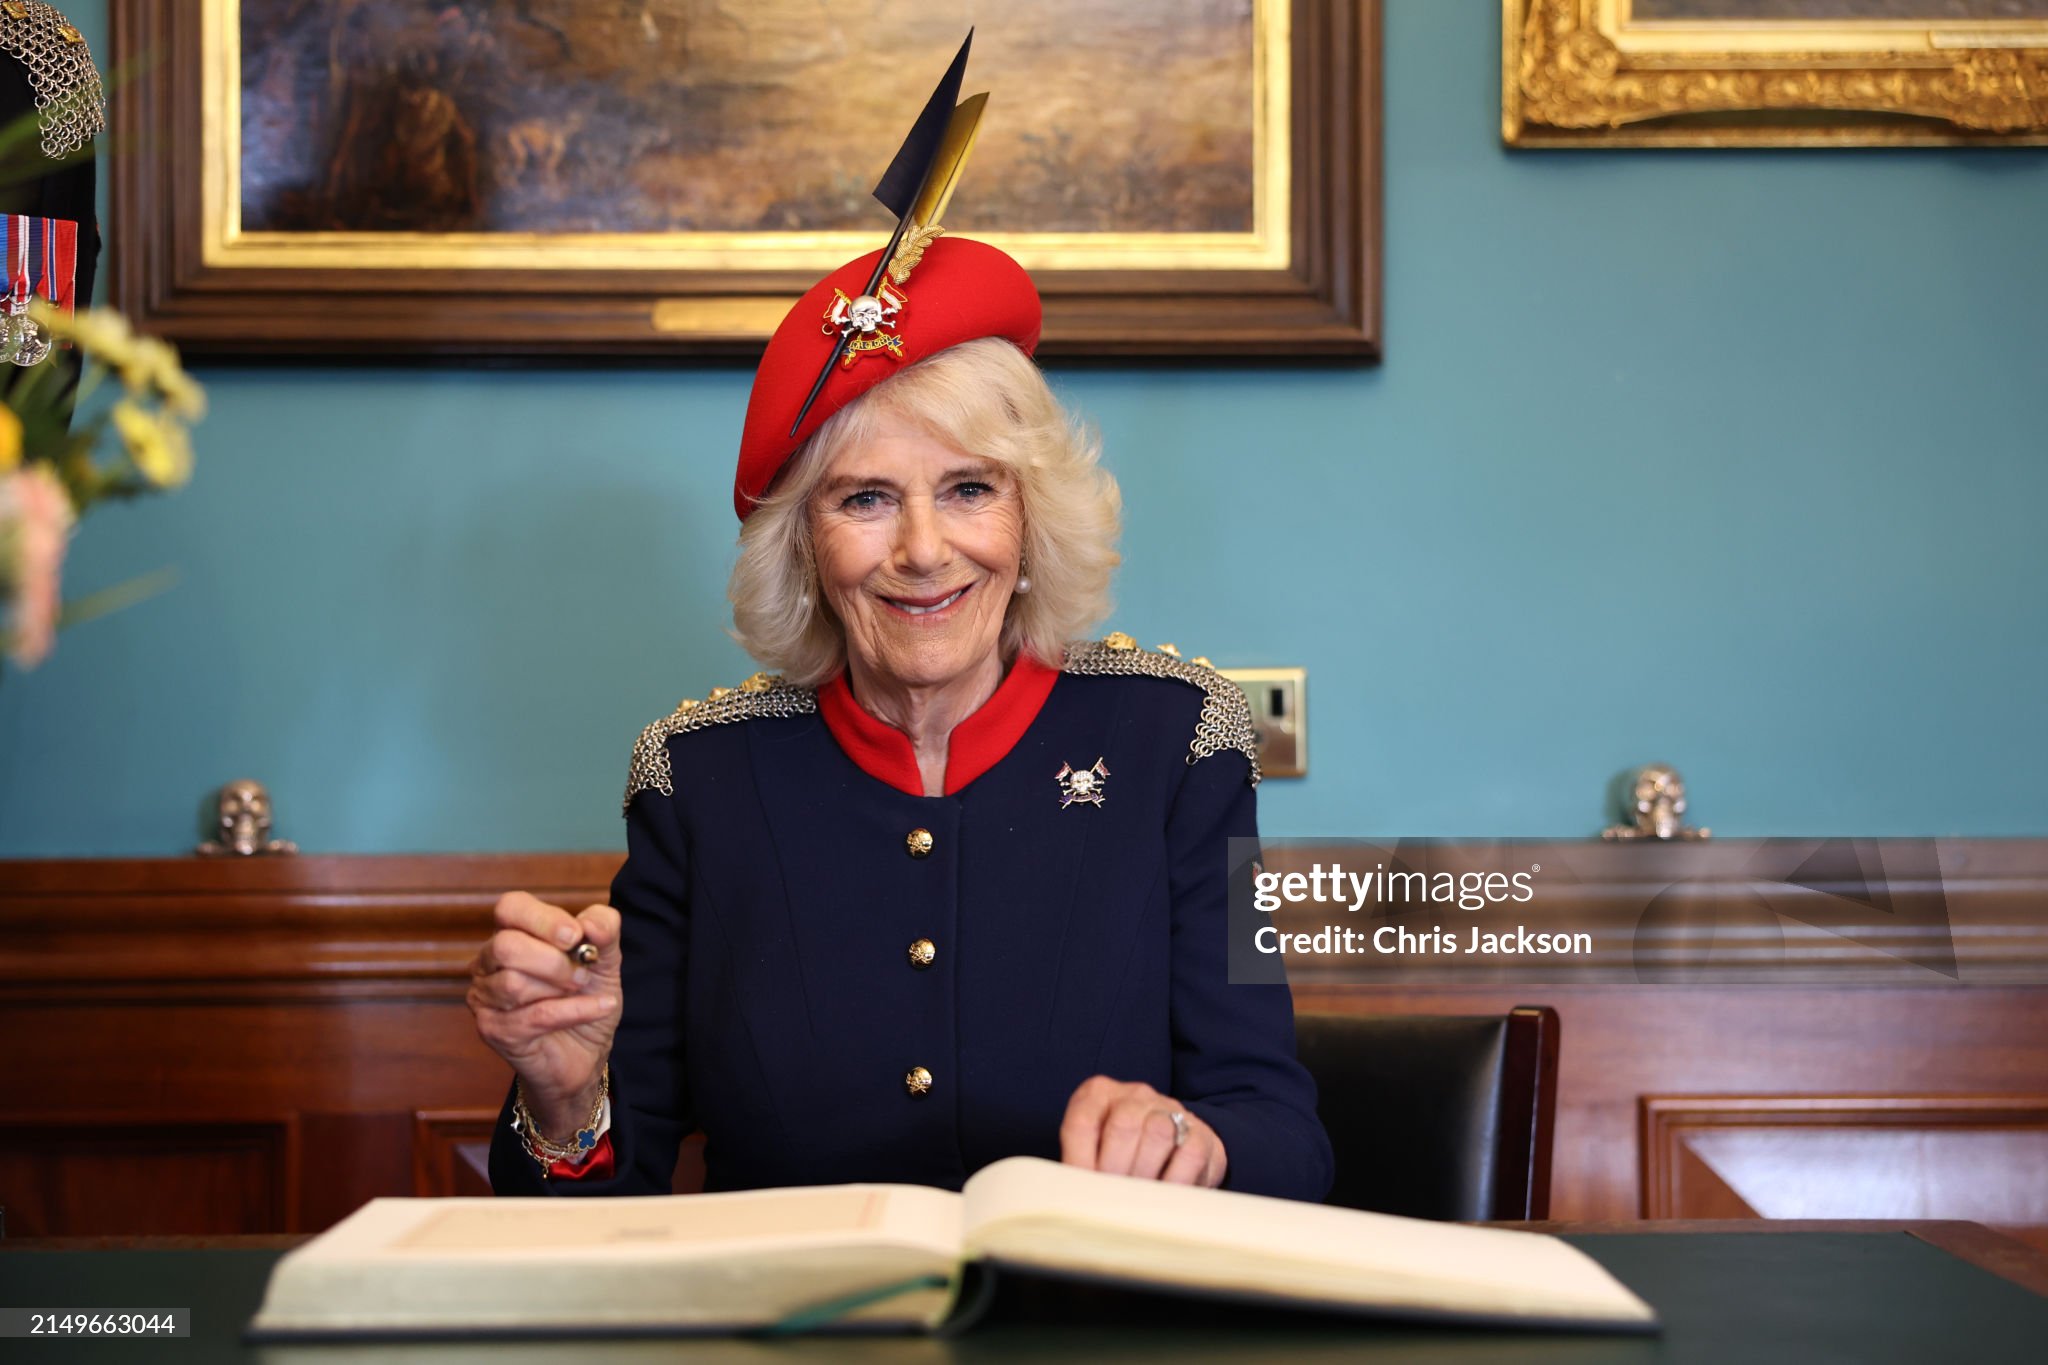 queen-camilla-visits-the-royal-lancers-in-north-yorkshire.jpg?s=2048x2048&w=gi&k=20&c=w0qDE4JKsf6aWv4nn5czqFpjIWzJkE_3NEyIRWCOOrg=